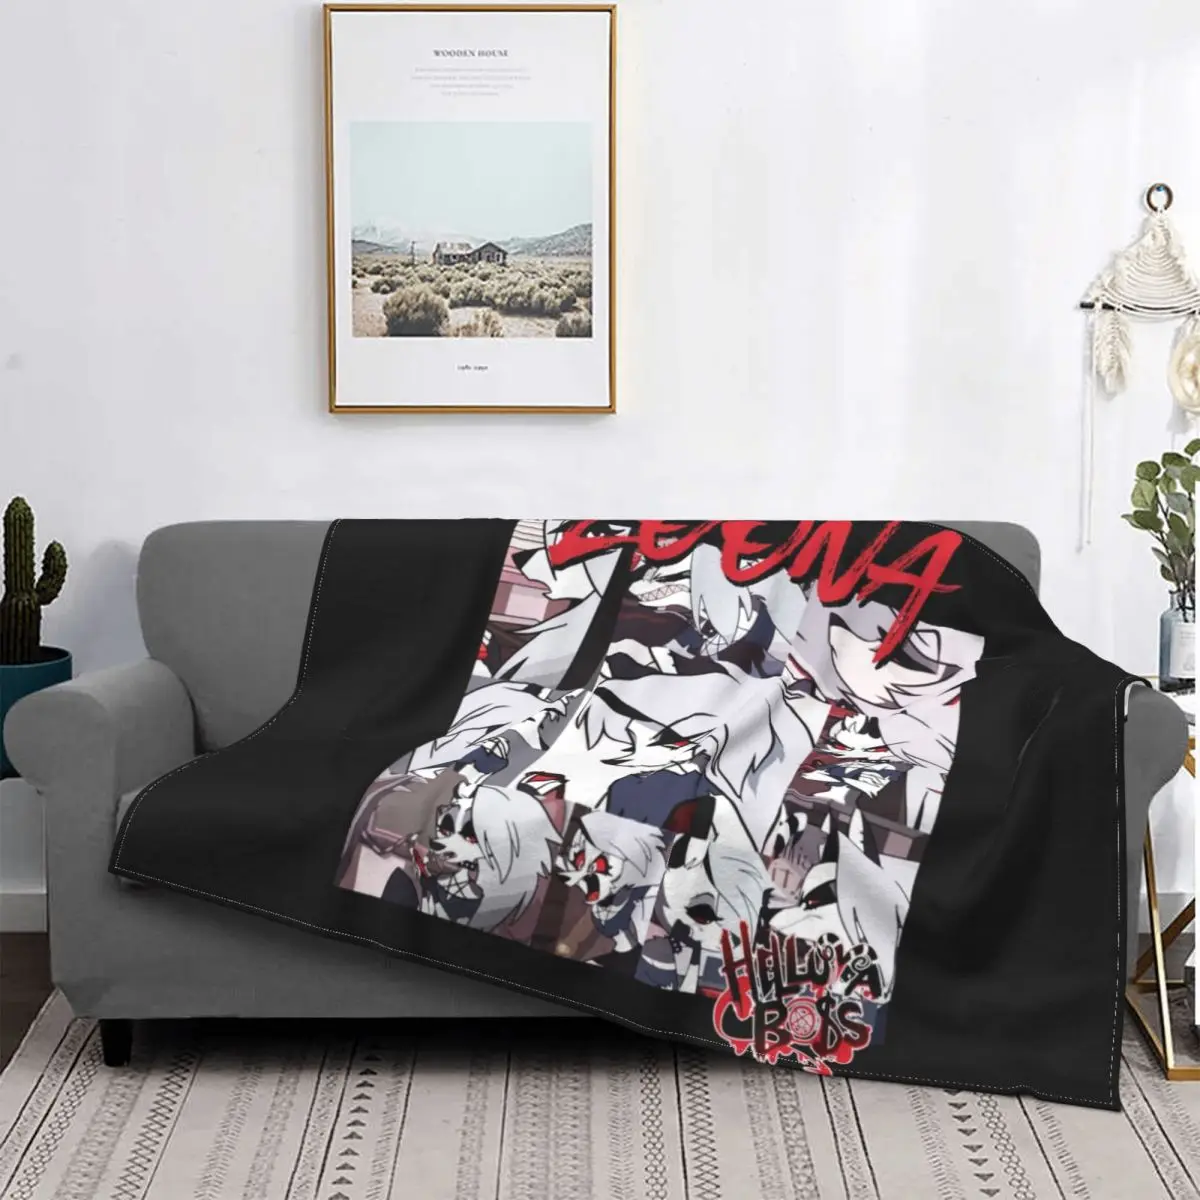 

Helluva Boss Millie Blitzo Blanket Flannel Animation Loona Verosika Mayday Multi-function Lightweight Throw Blanket Bed Couch